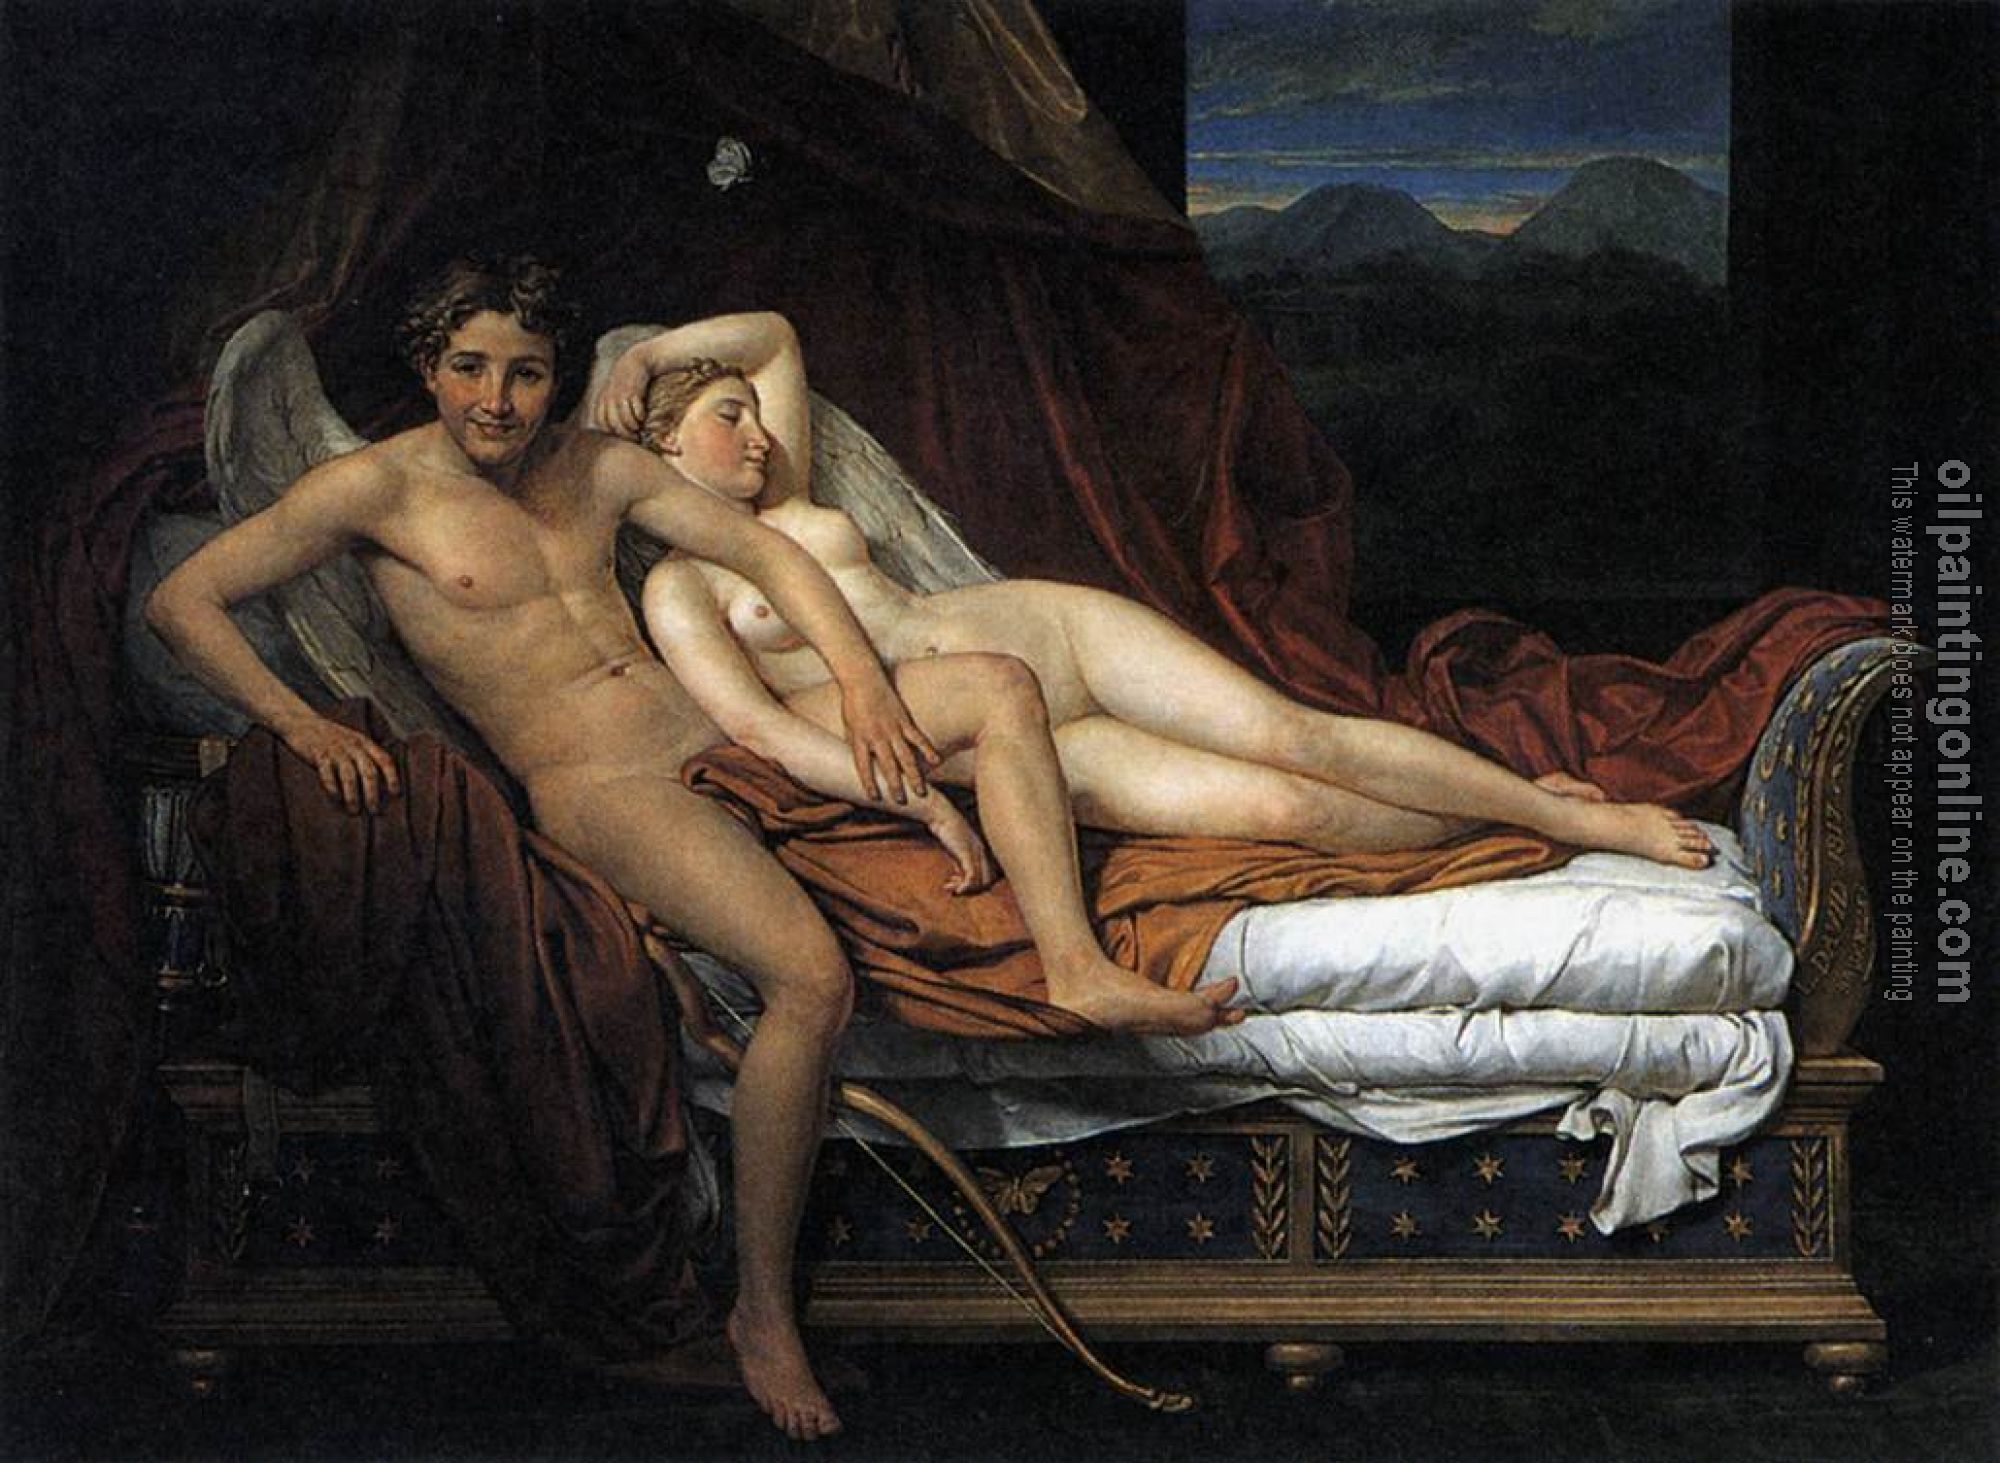 David, Jacques-Louis - Cupid and Psyche